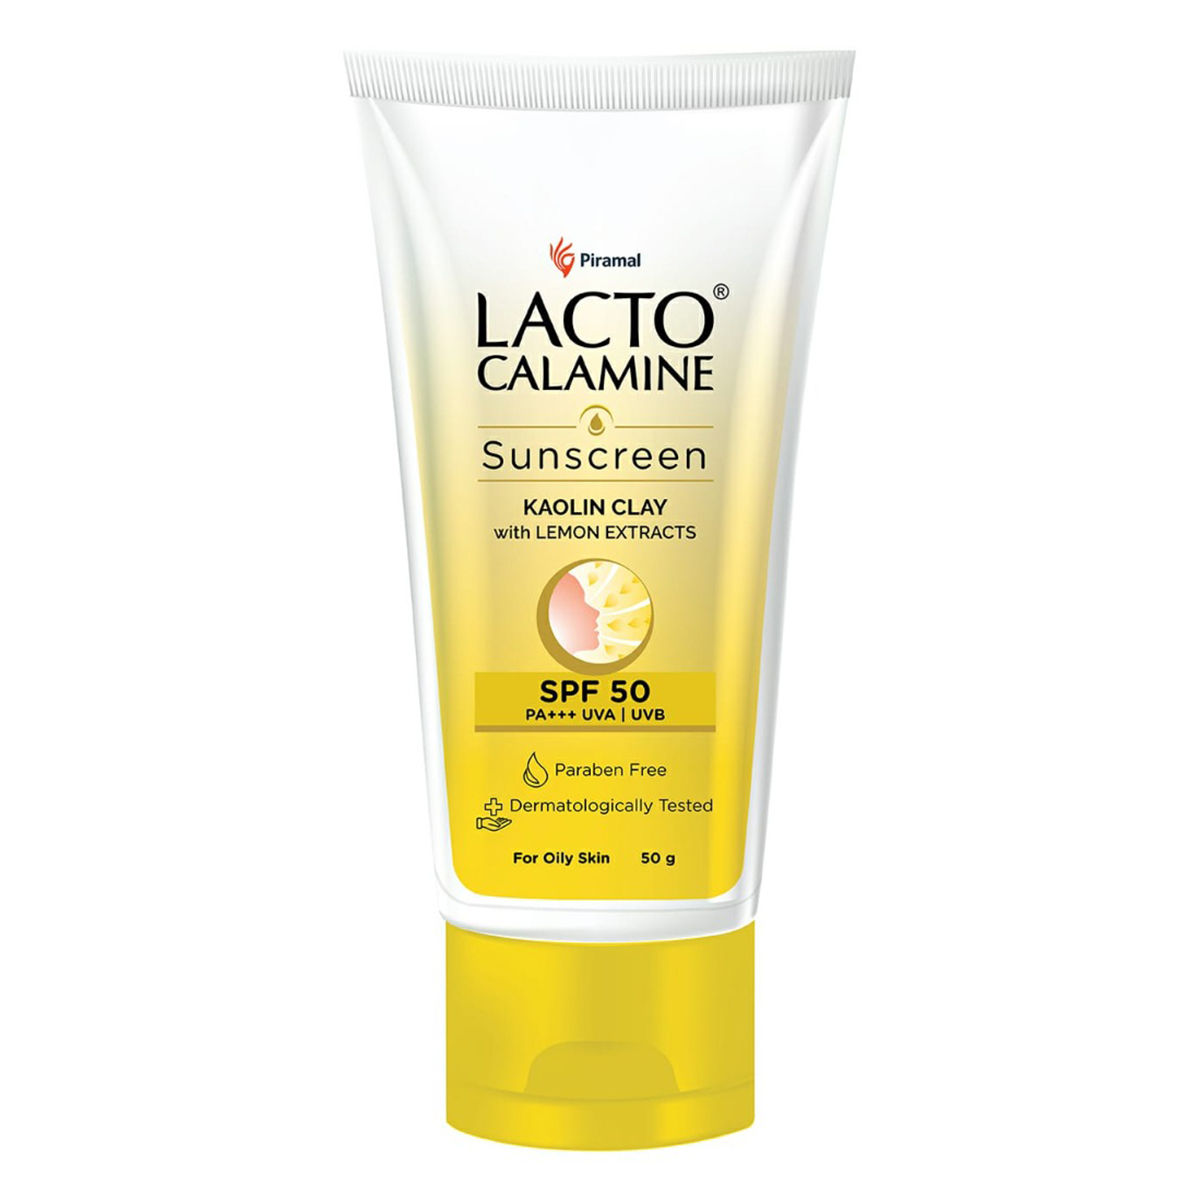 Lacto Calamine SPF 50 PA+++ UVA/UVB Sunscreen Lotion, 50 gm, Pack of 1 